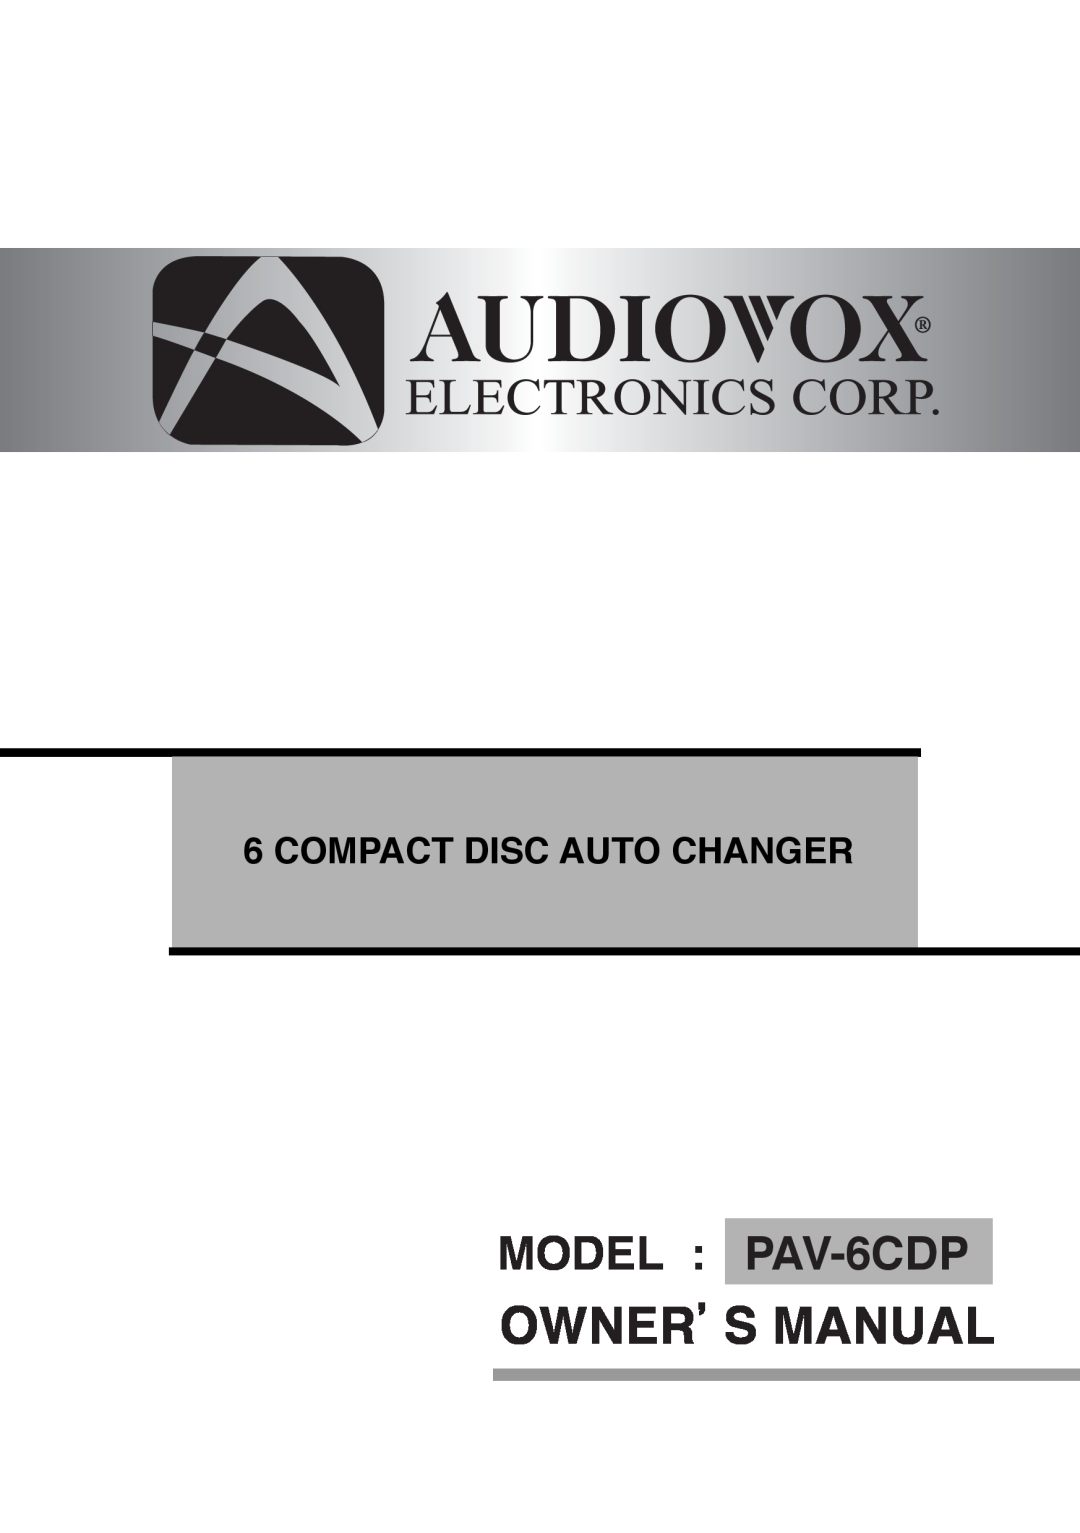 Audiovox SP6CDP manual Owner S Manual, MODEL PAV-6CDP, Compact Disc Auto Changer 